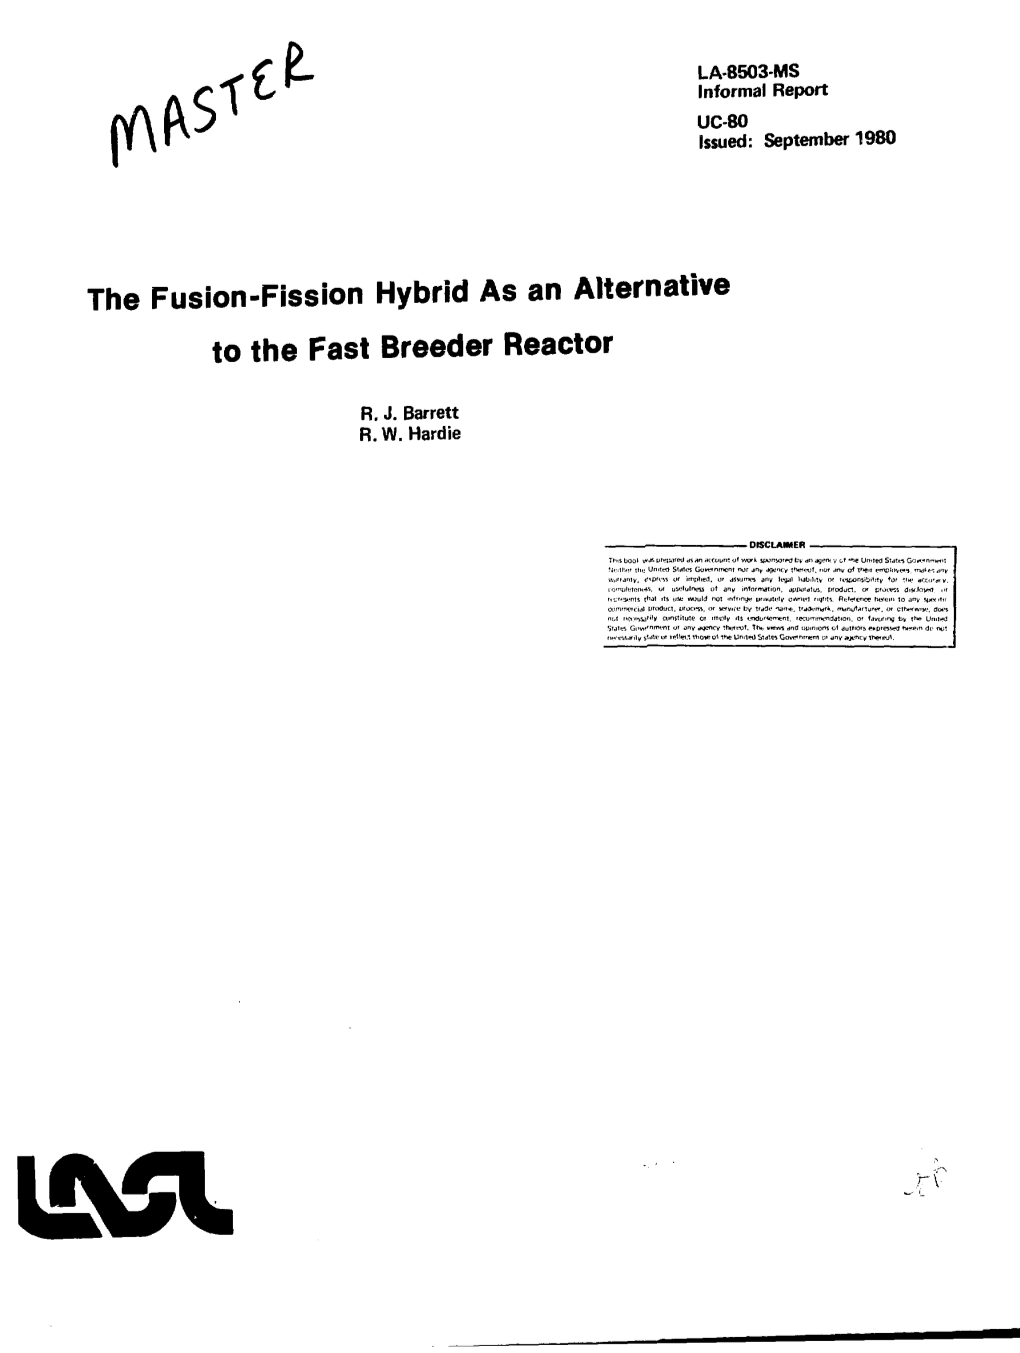 The Fusion-Fission Hybrid As an Alternative to the Fast Breeder Reactor